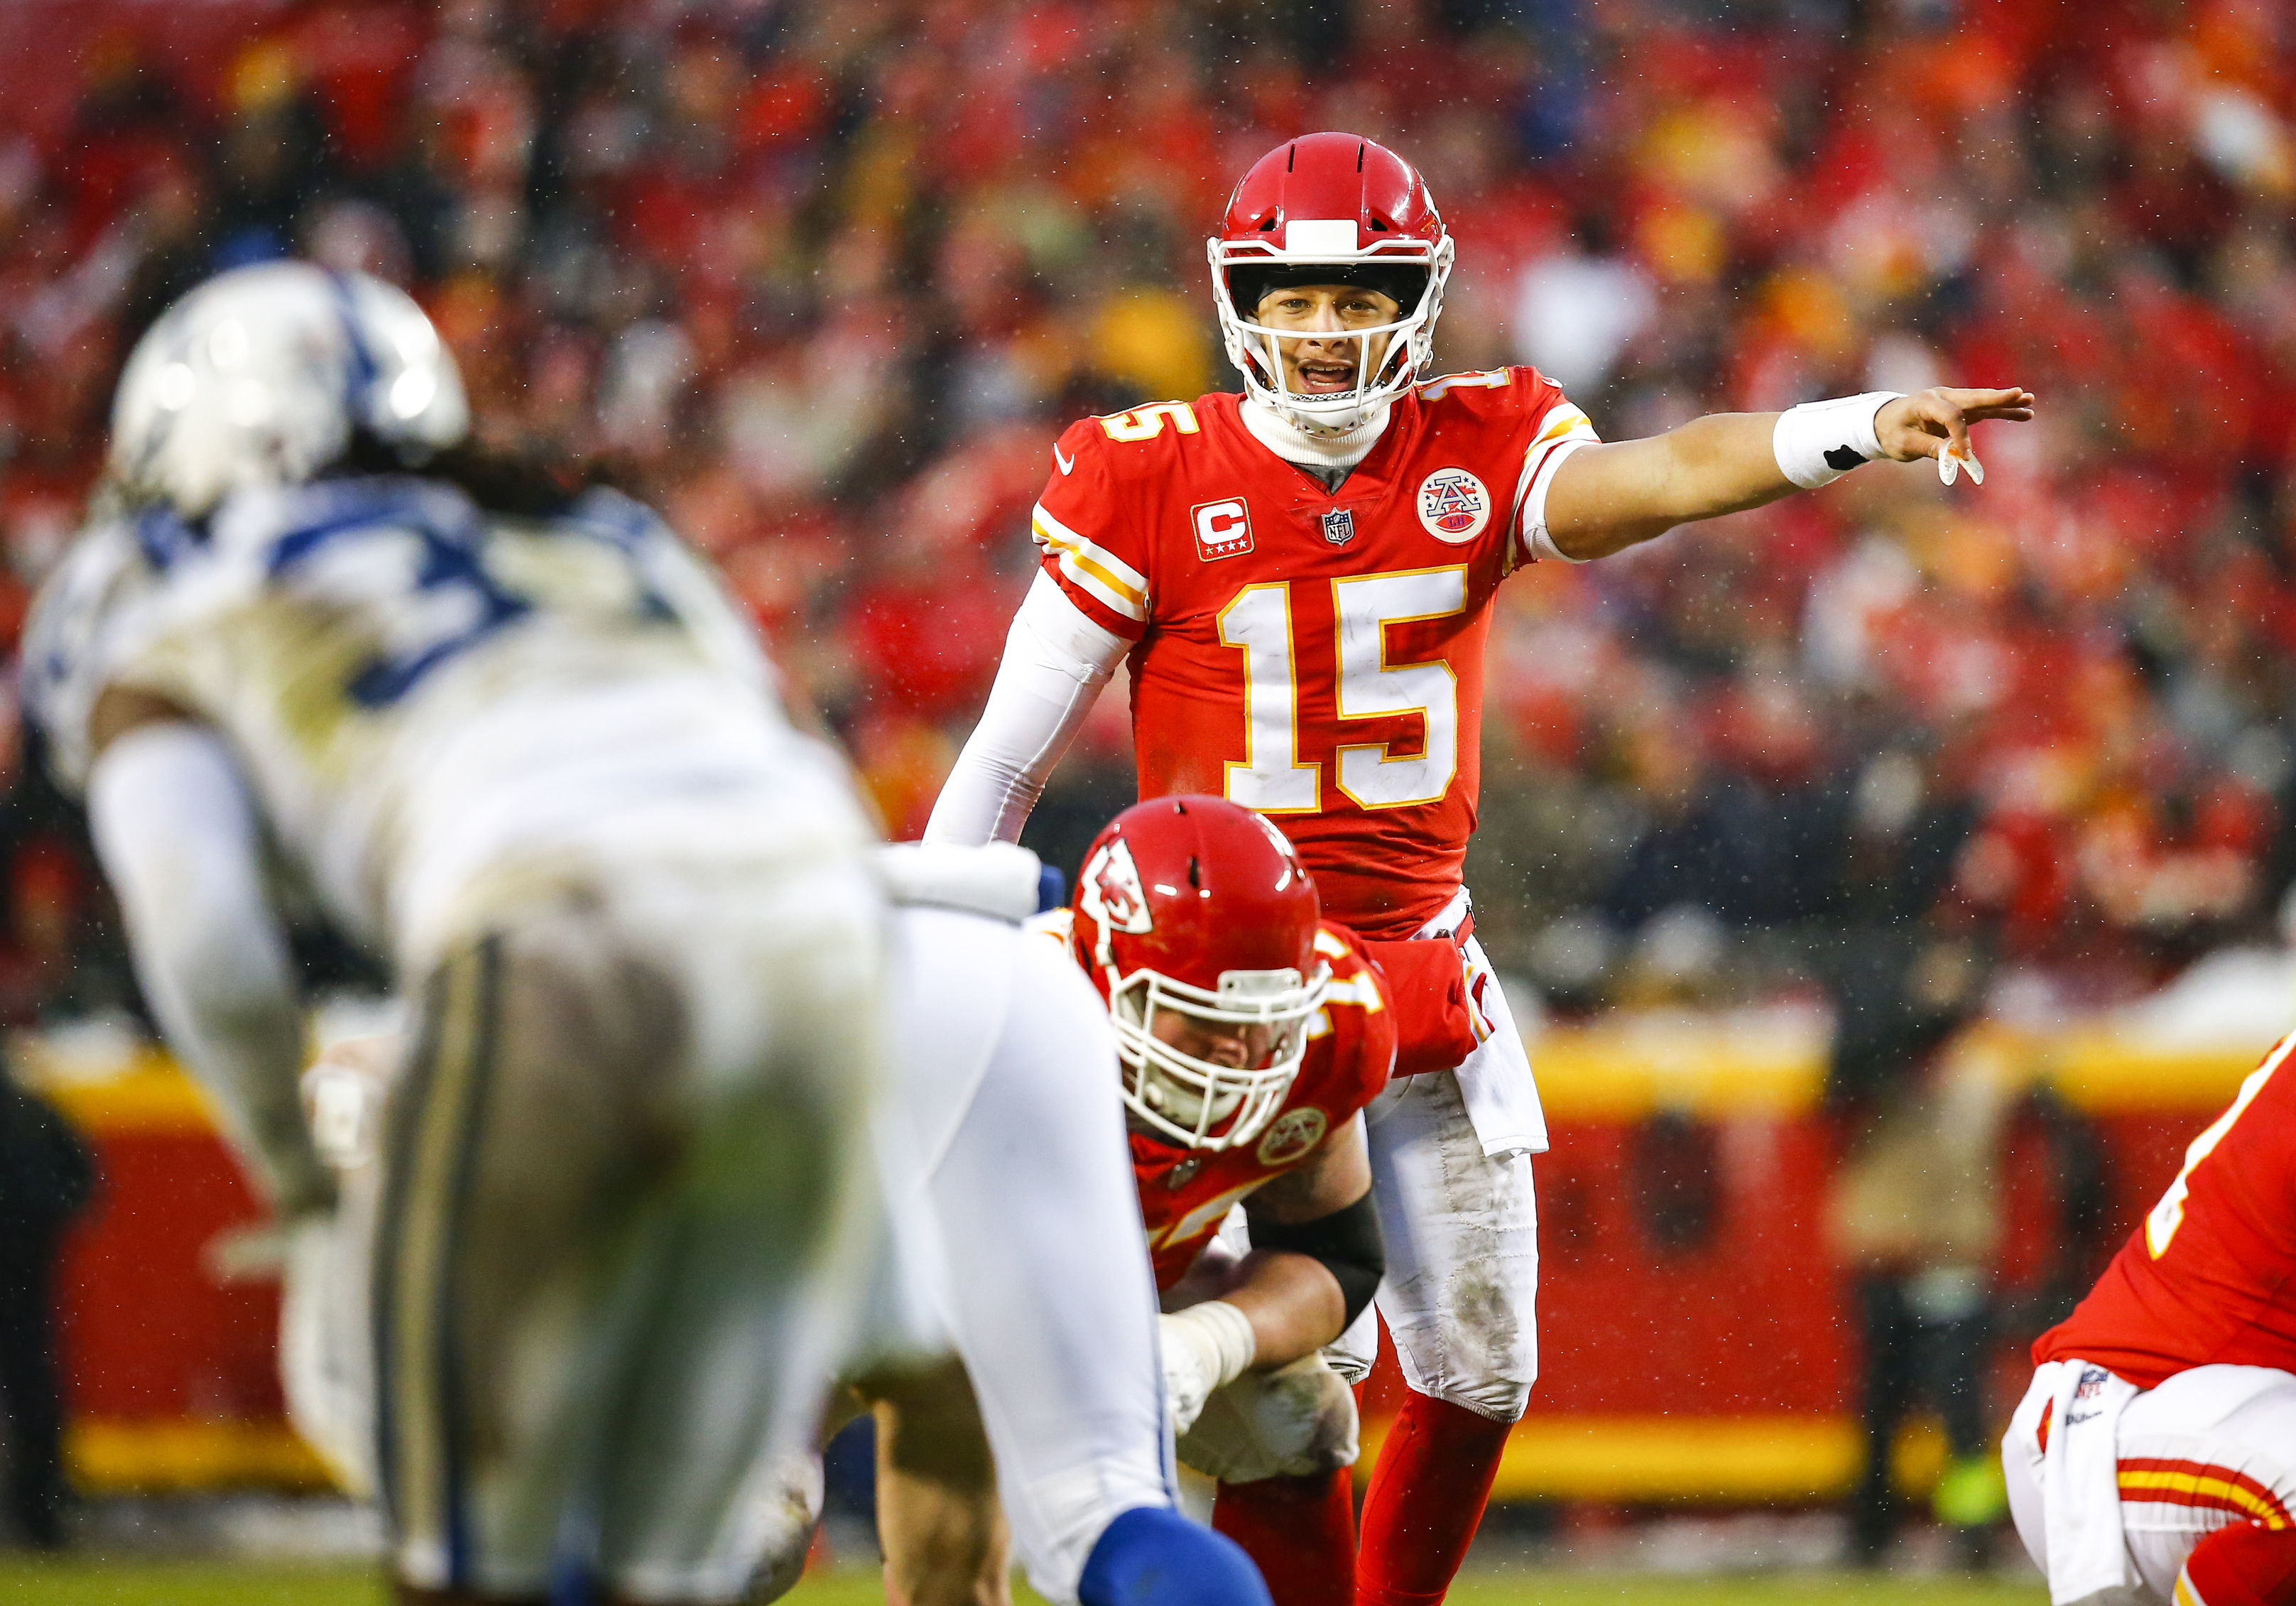 Patrick Mahomes Worst Fantasy Stats Come in Cold Weather Games Similar to AFC Championship Forecast